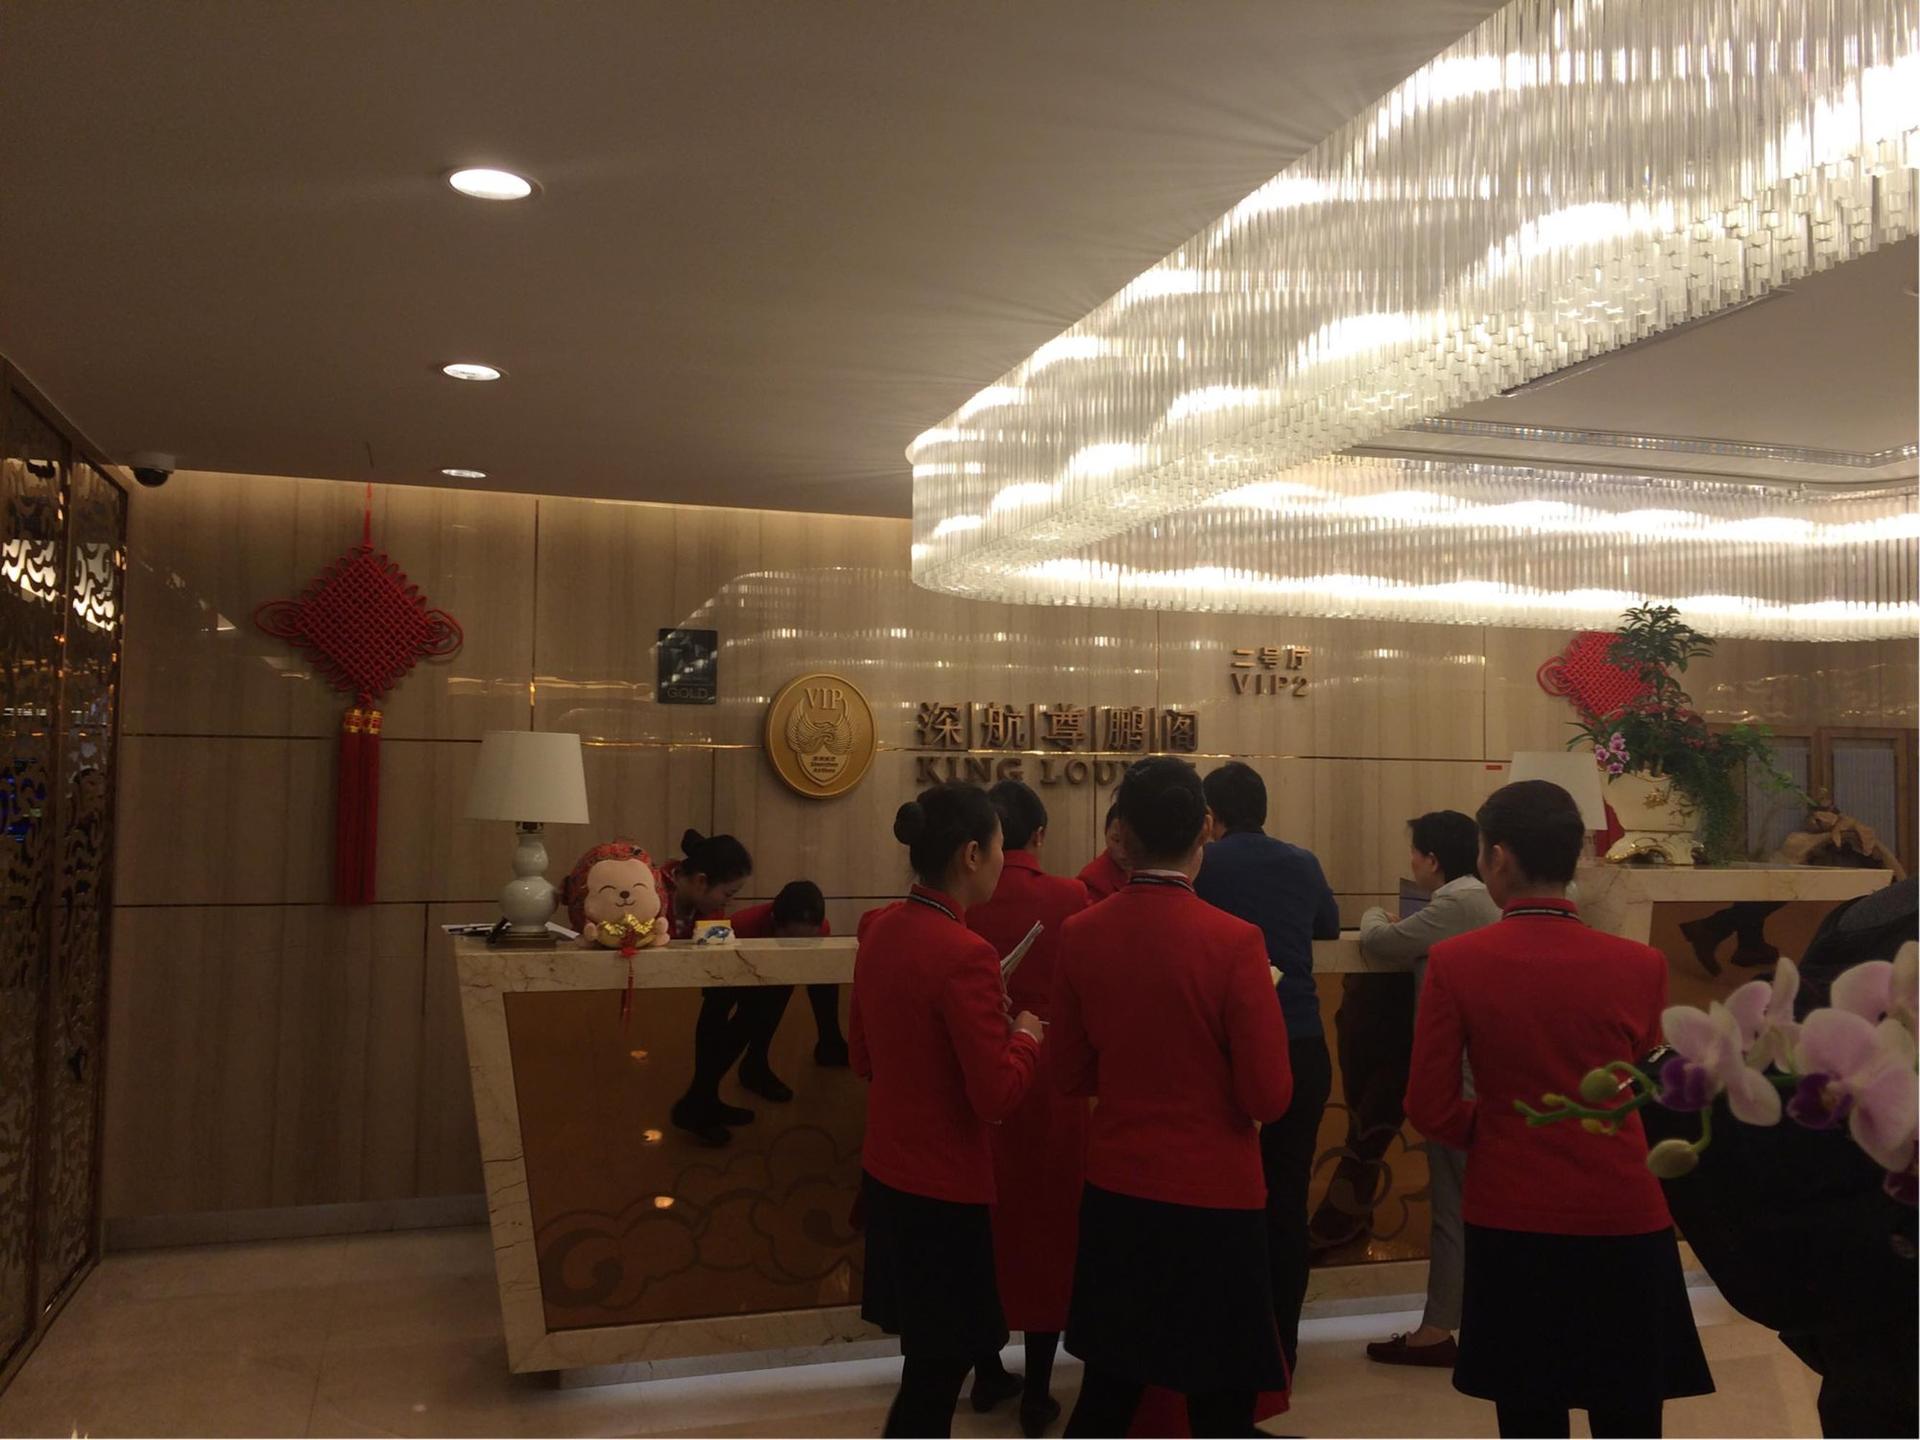 Shenzhen Airlines King Lounge Hall 2 image 5 of 7